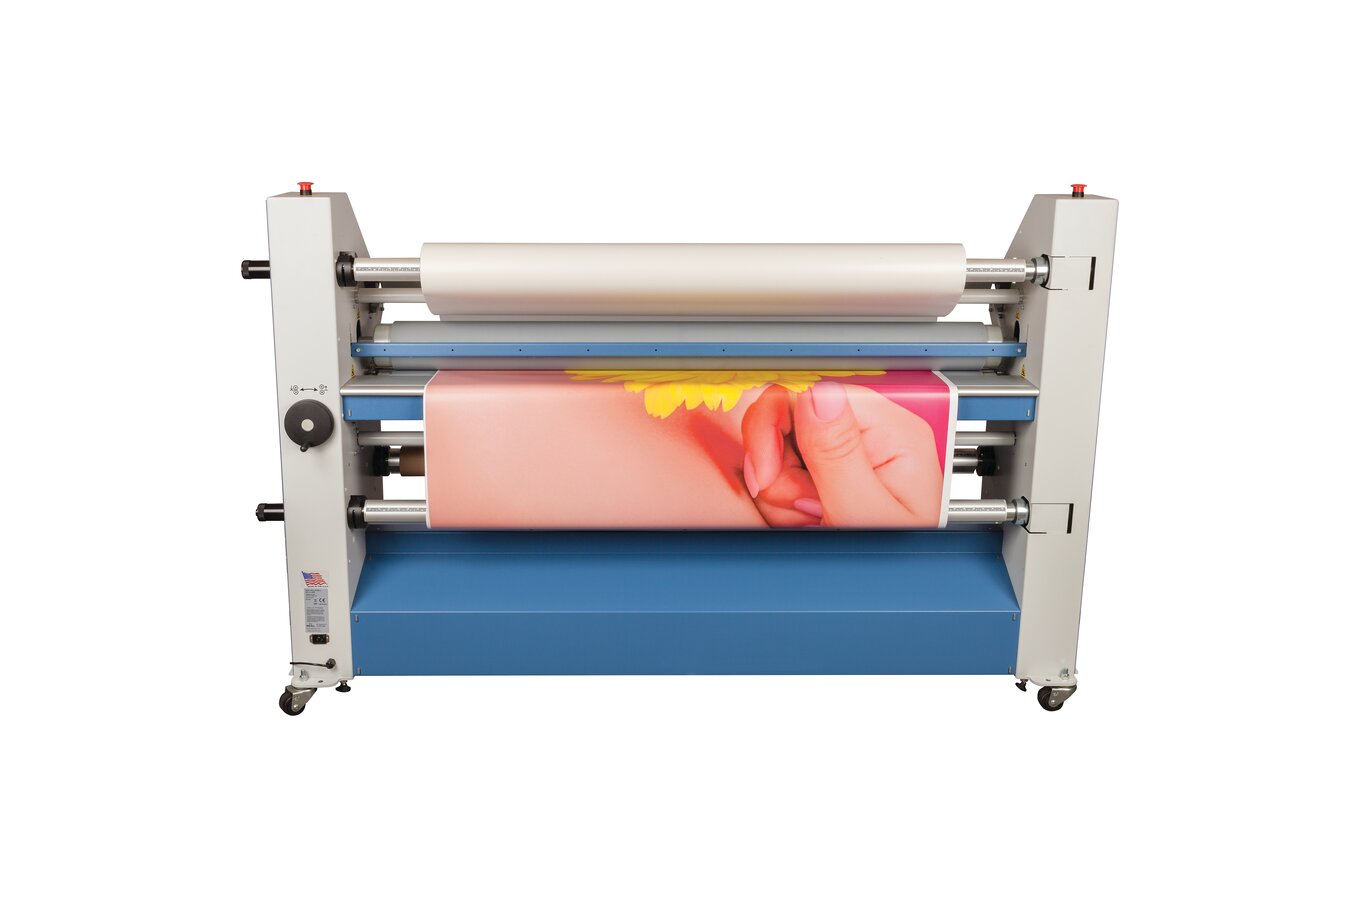 SEAL 62 Pro S Laminator, 61" Max. Width - Call For Special Prices and Promotions